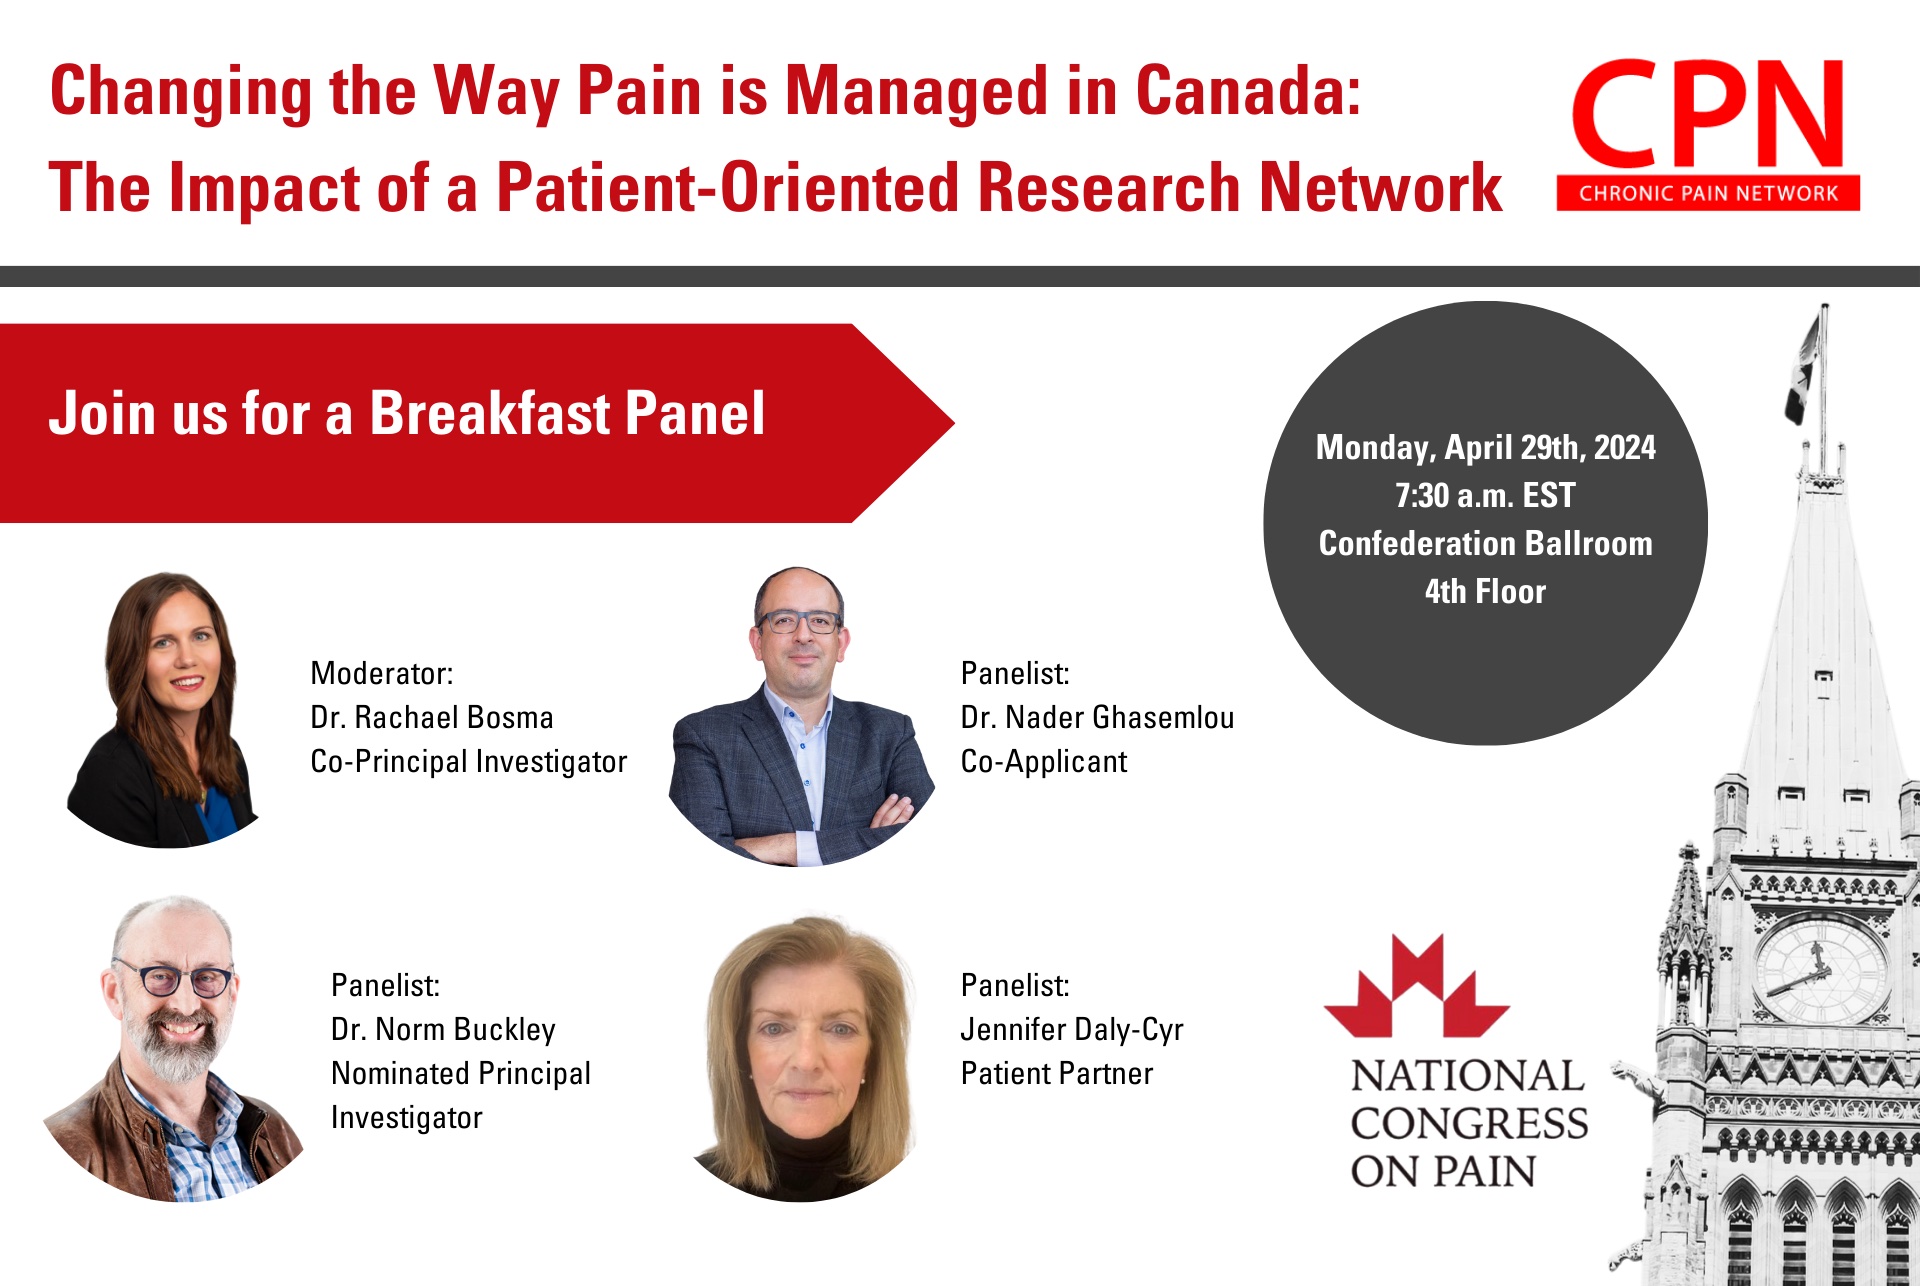 Changing the Way Pain is Managed in Canada: The Impact of a Patient-Oriented Research Network breakfast panel session with photos of moderator and panelists.